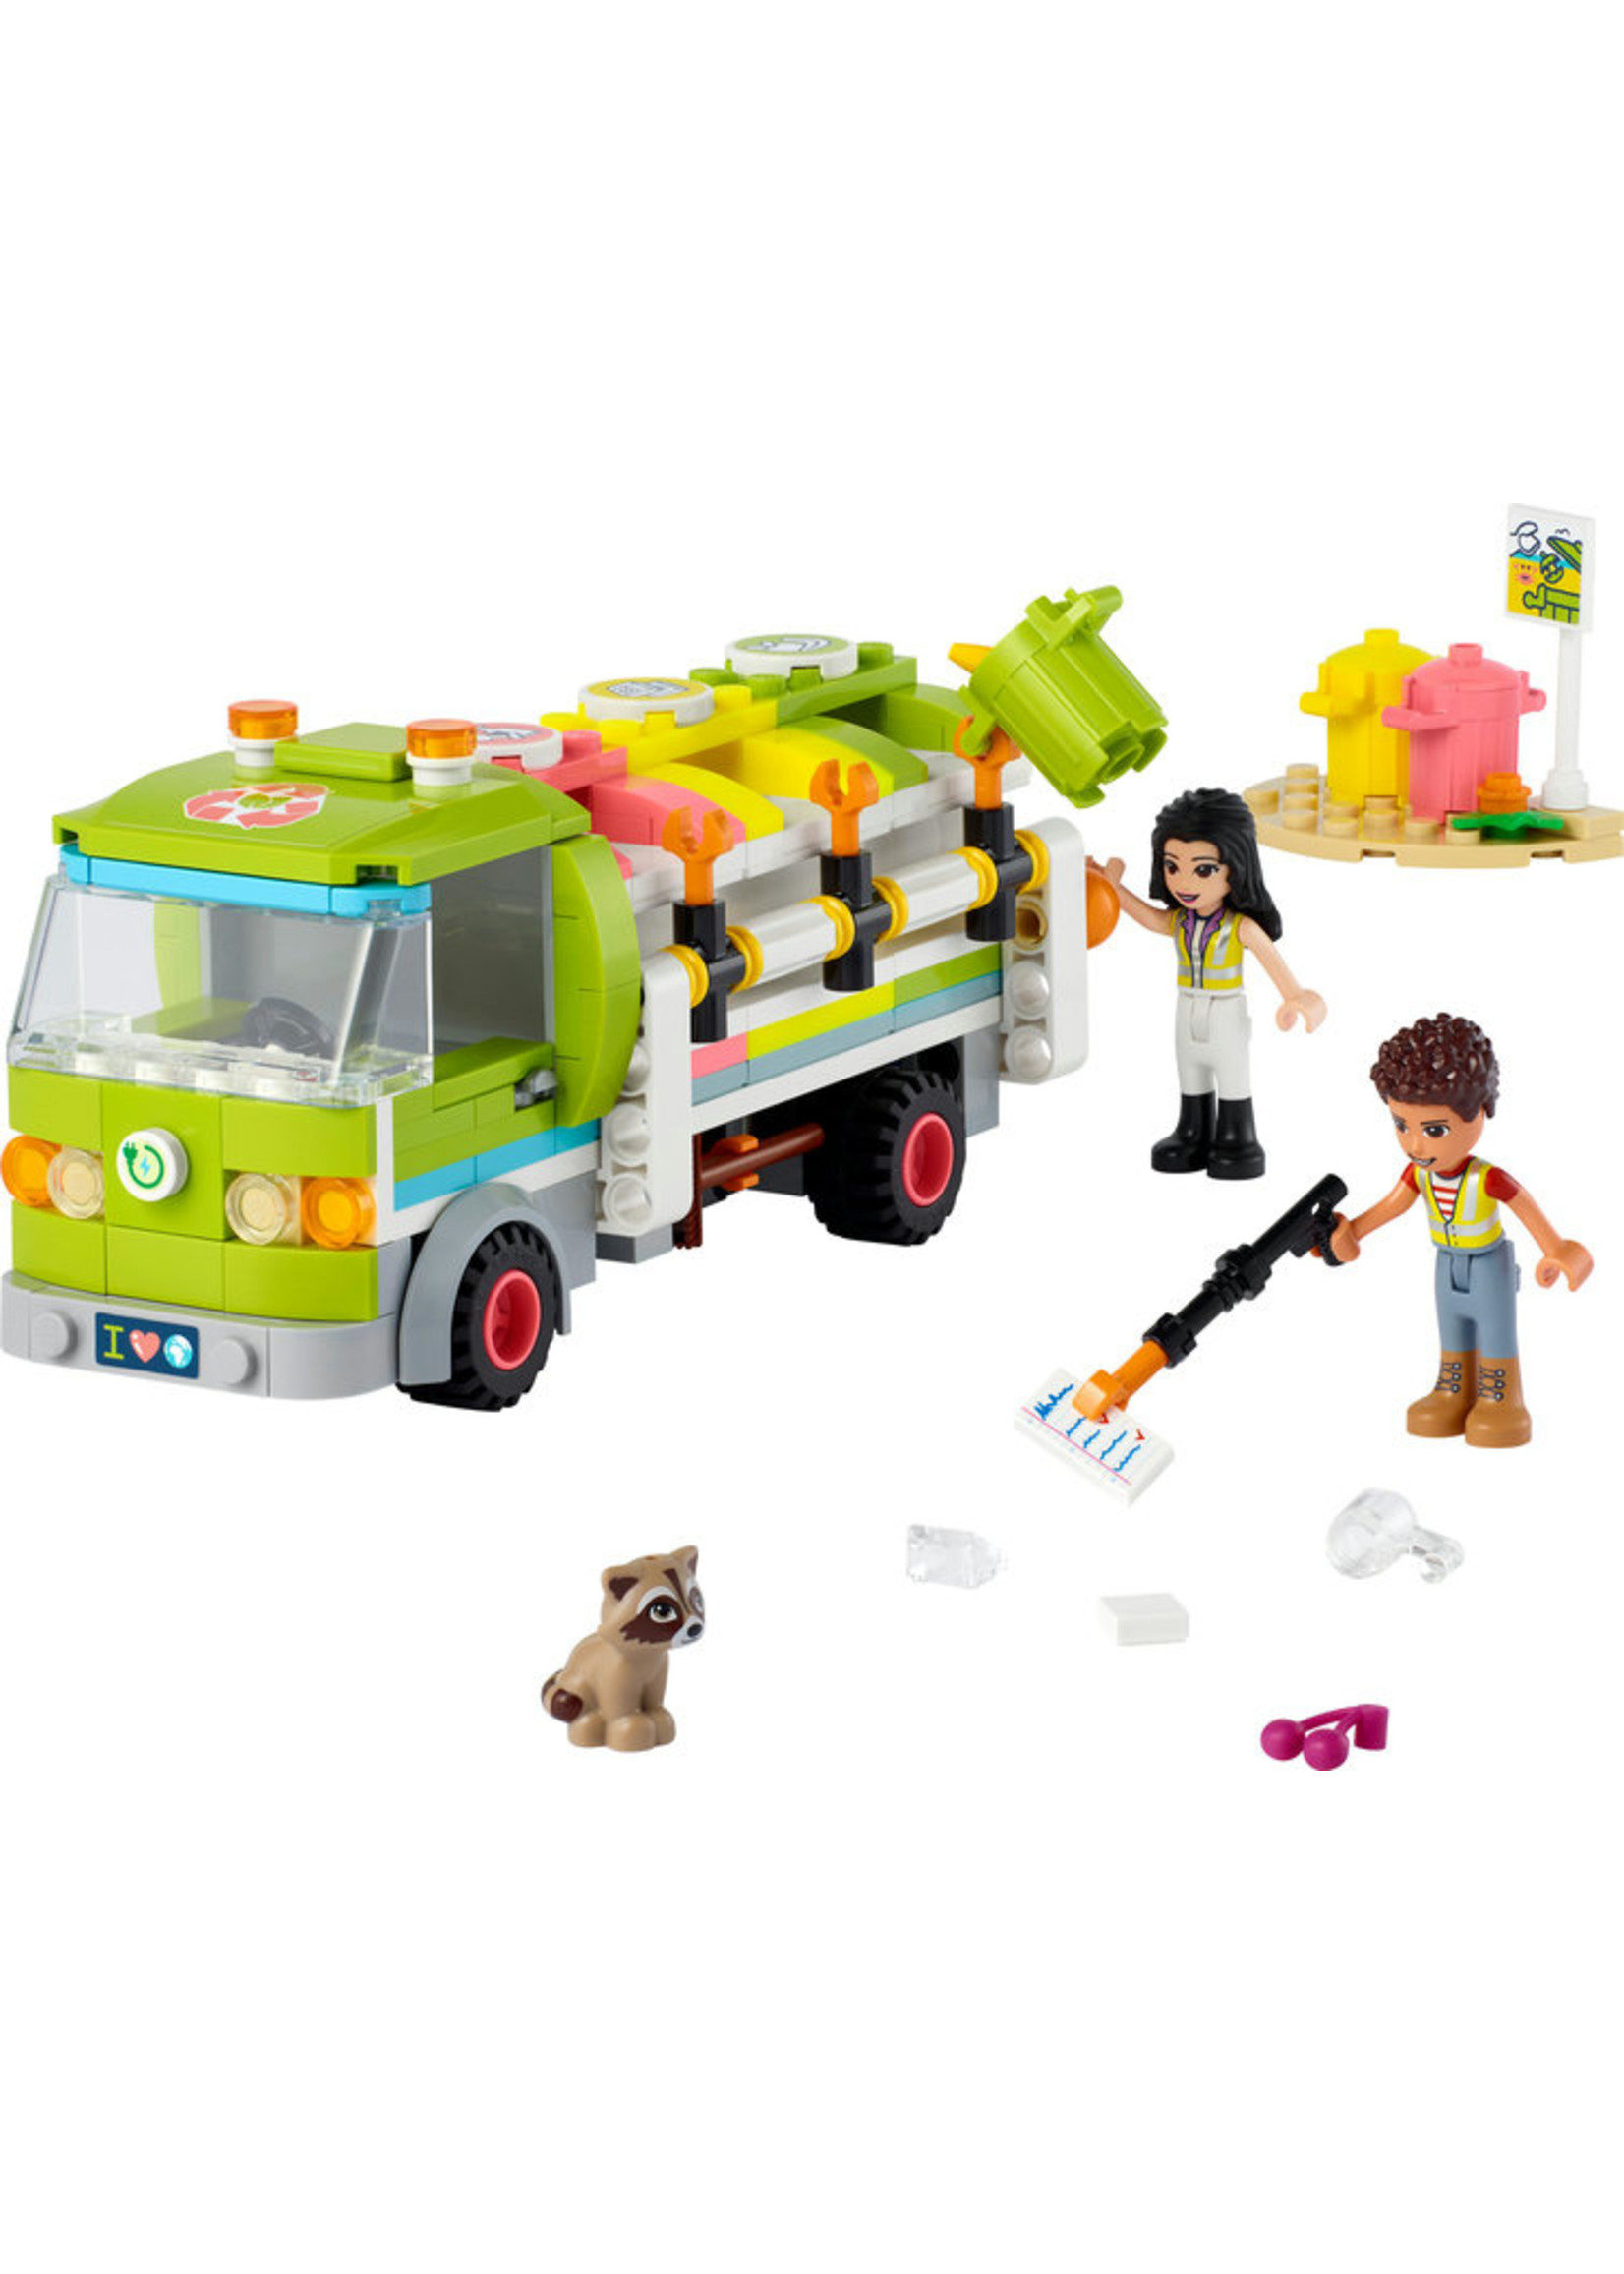 LEGO 41712 - Recycling Truck